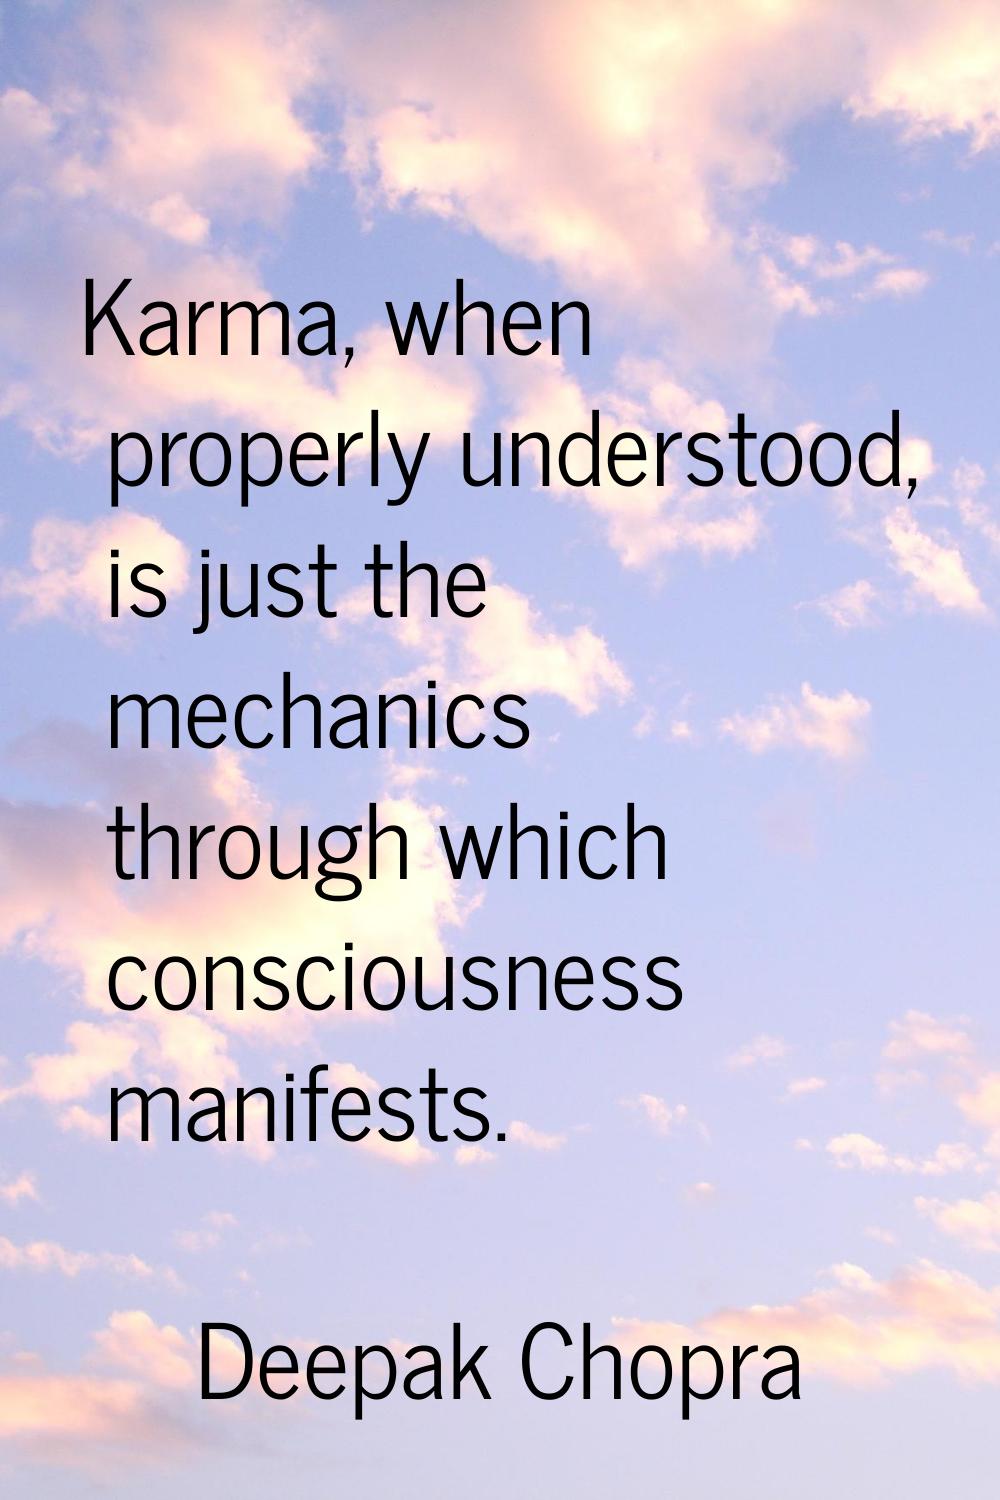 Karma, when properly understood, is just the mechanics through which consciousness manifests.